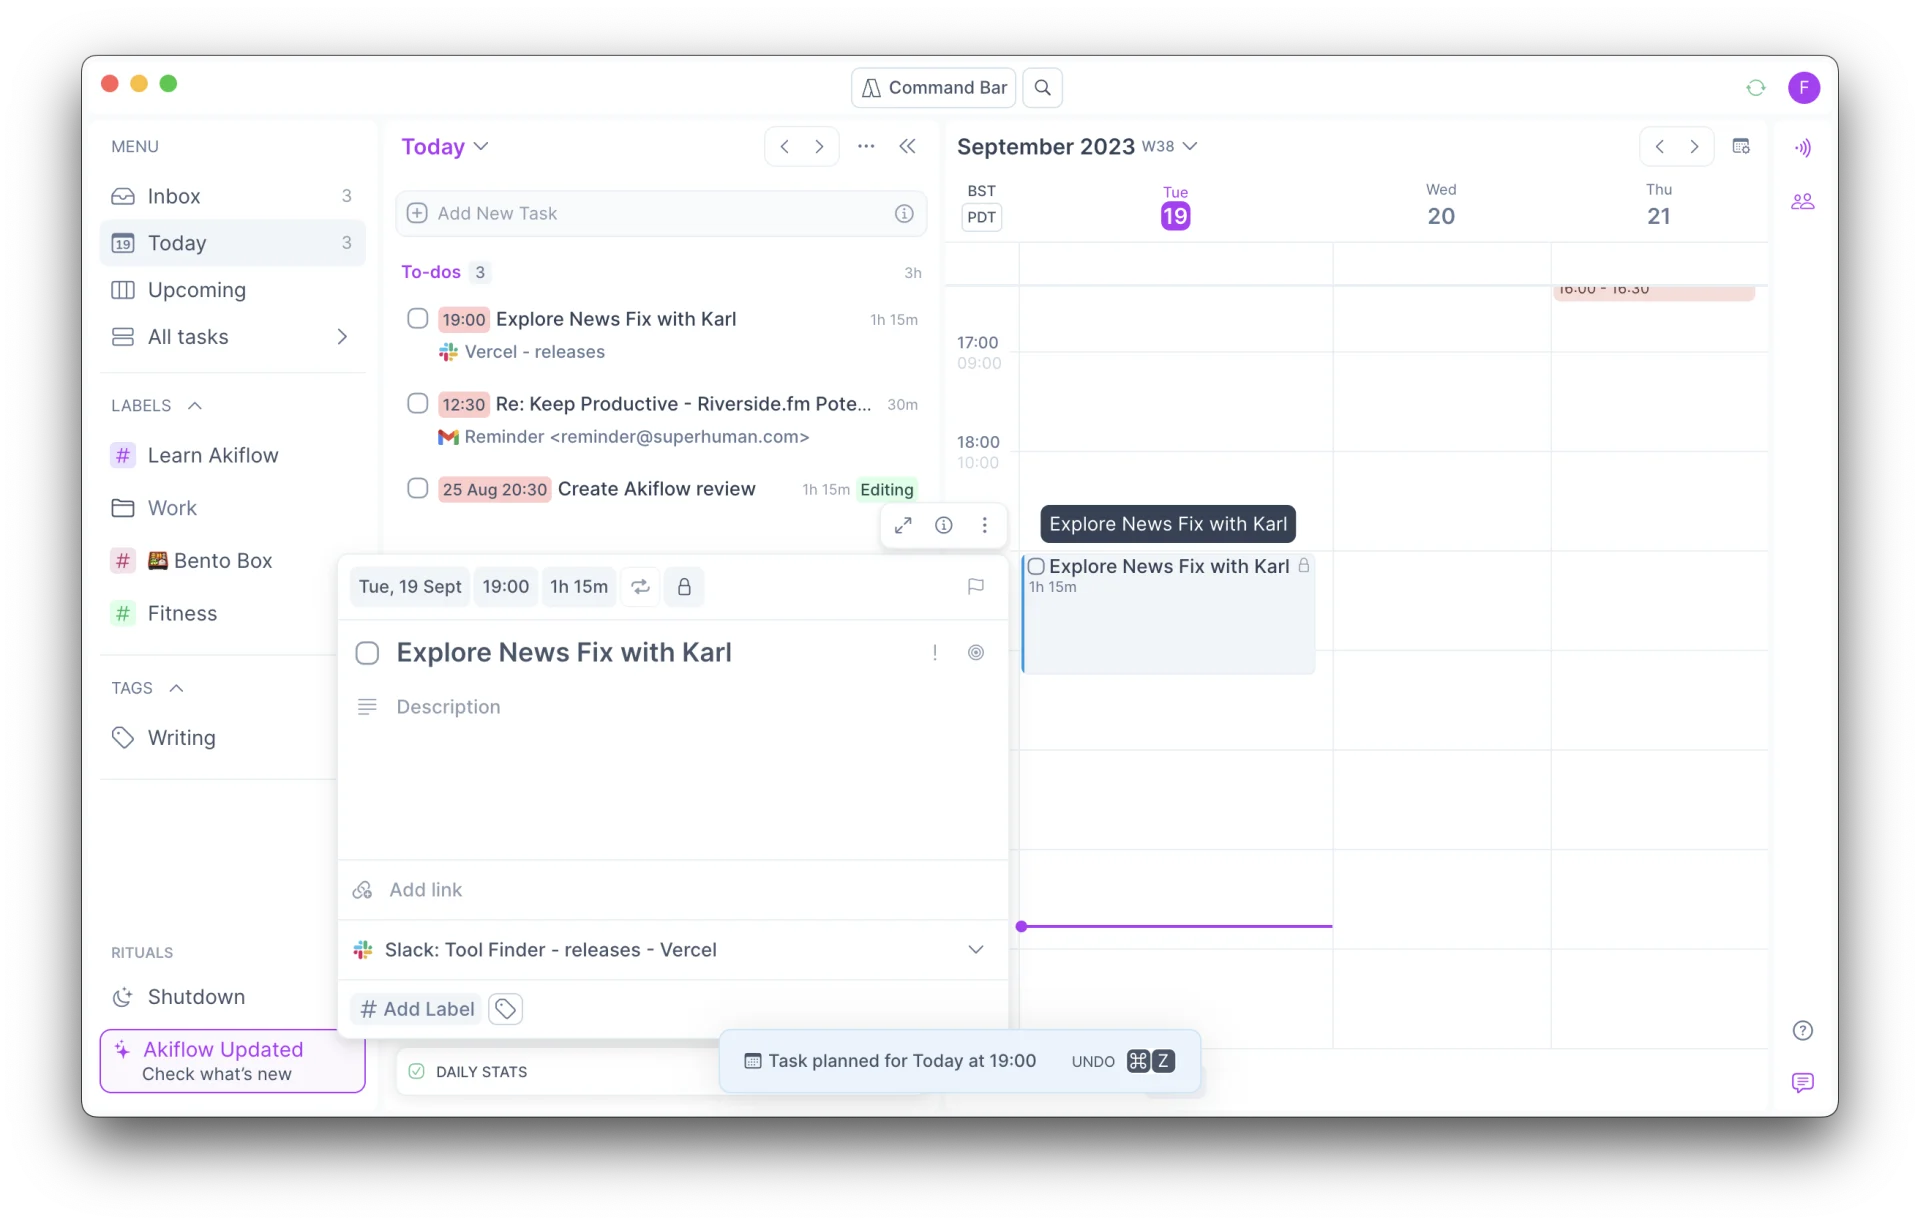 Managing your Tasks and Calendar with Akiflow